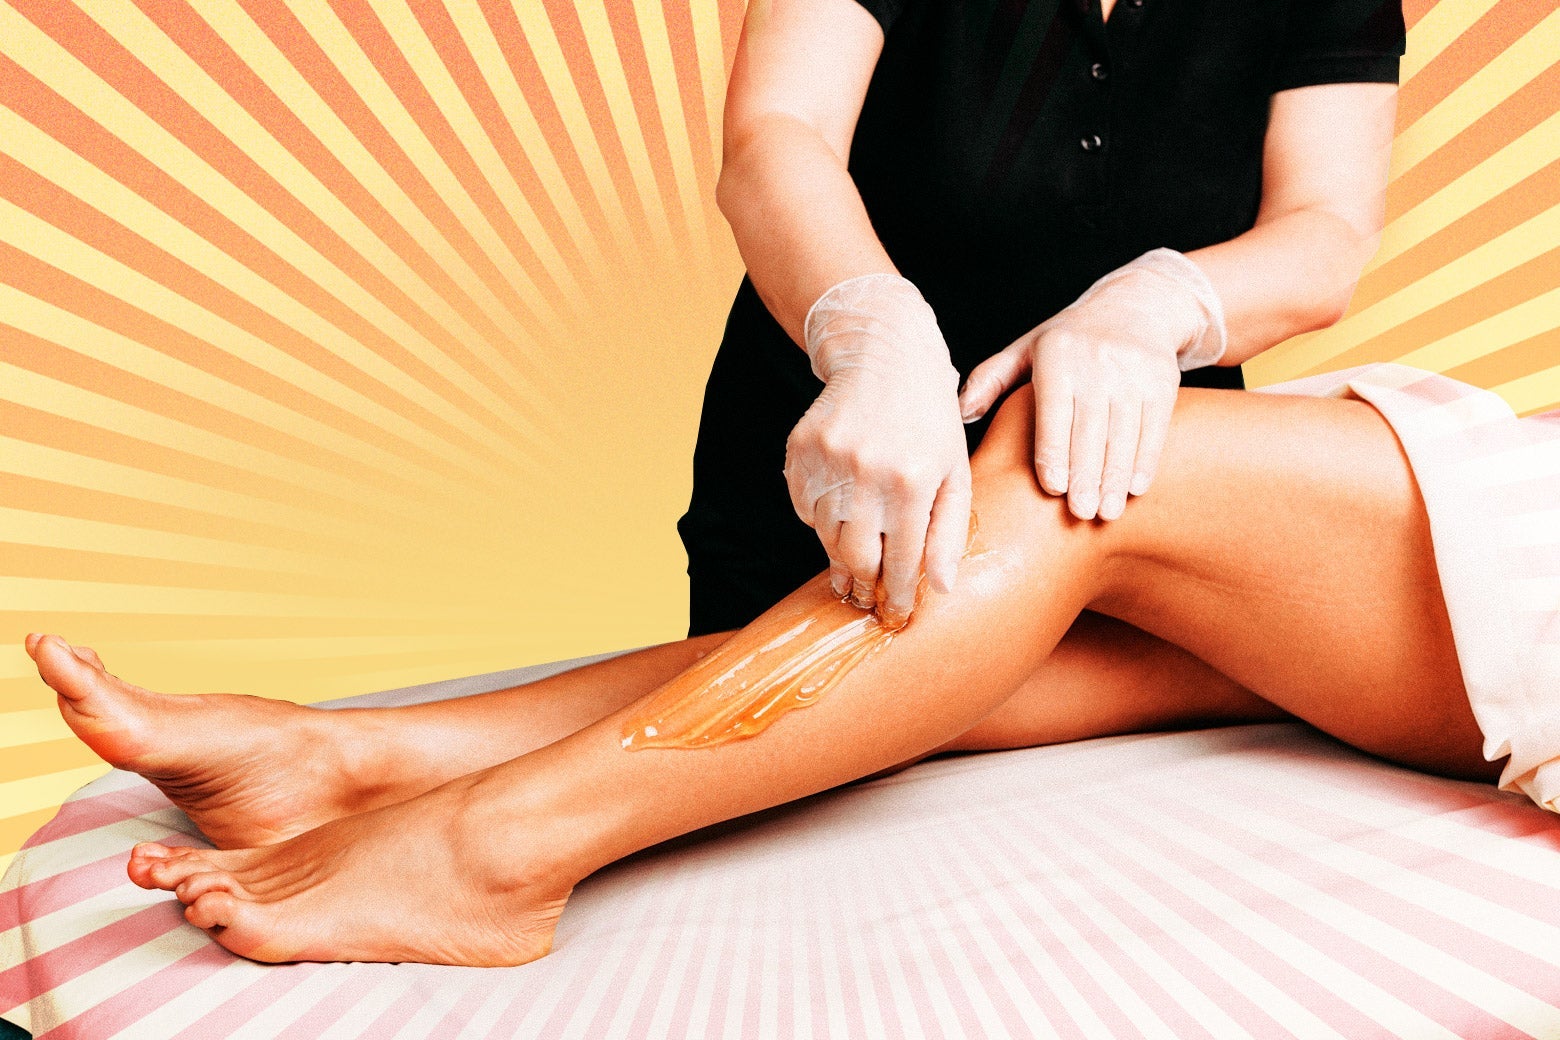 A pair of legs get waxed by a professional.